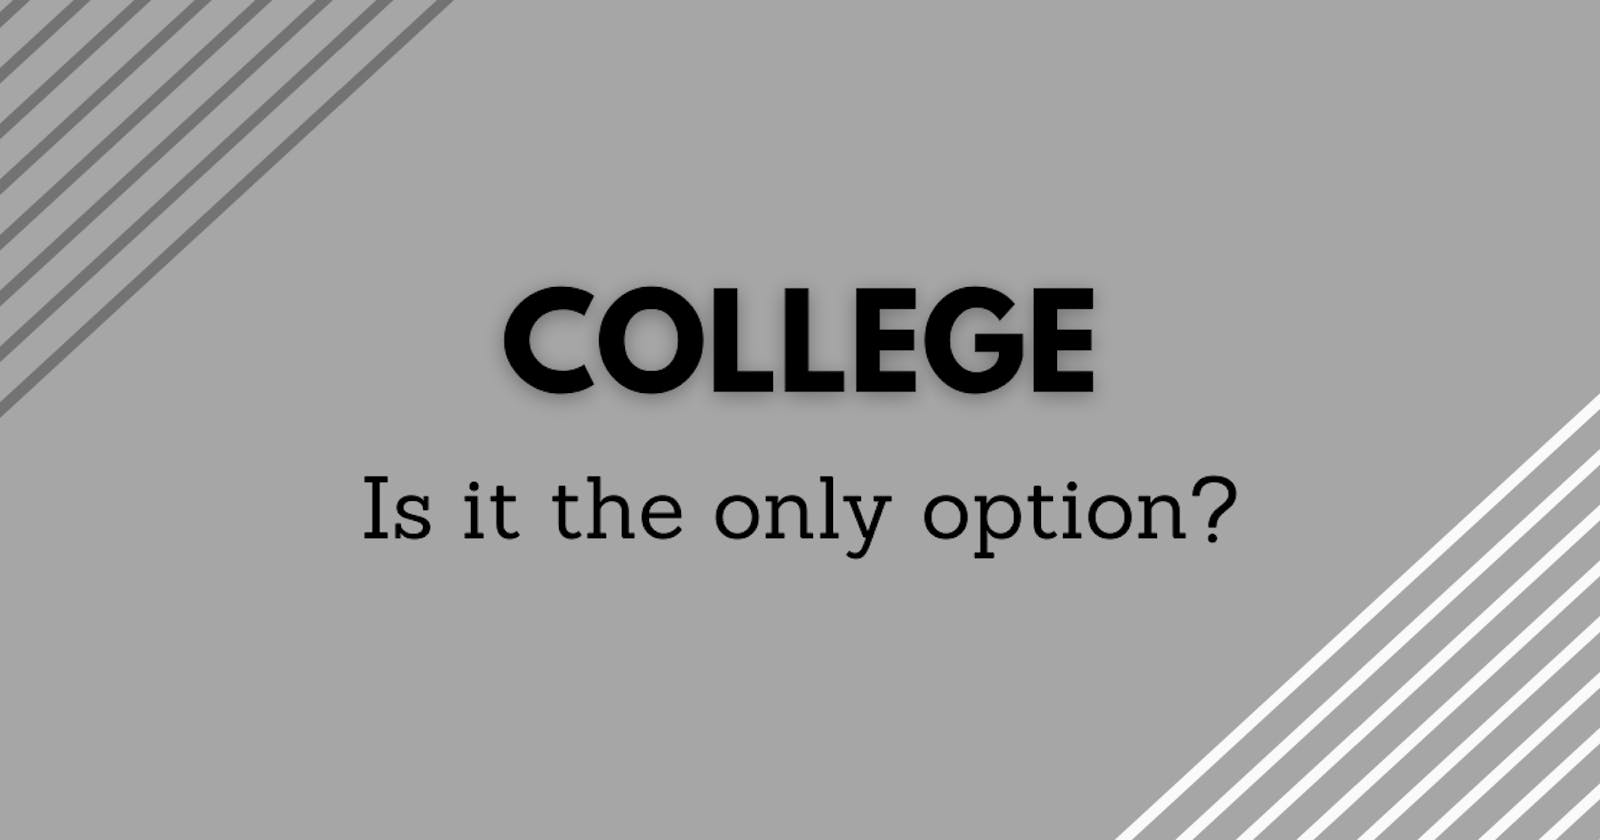 Is College the Only Option?